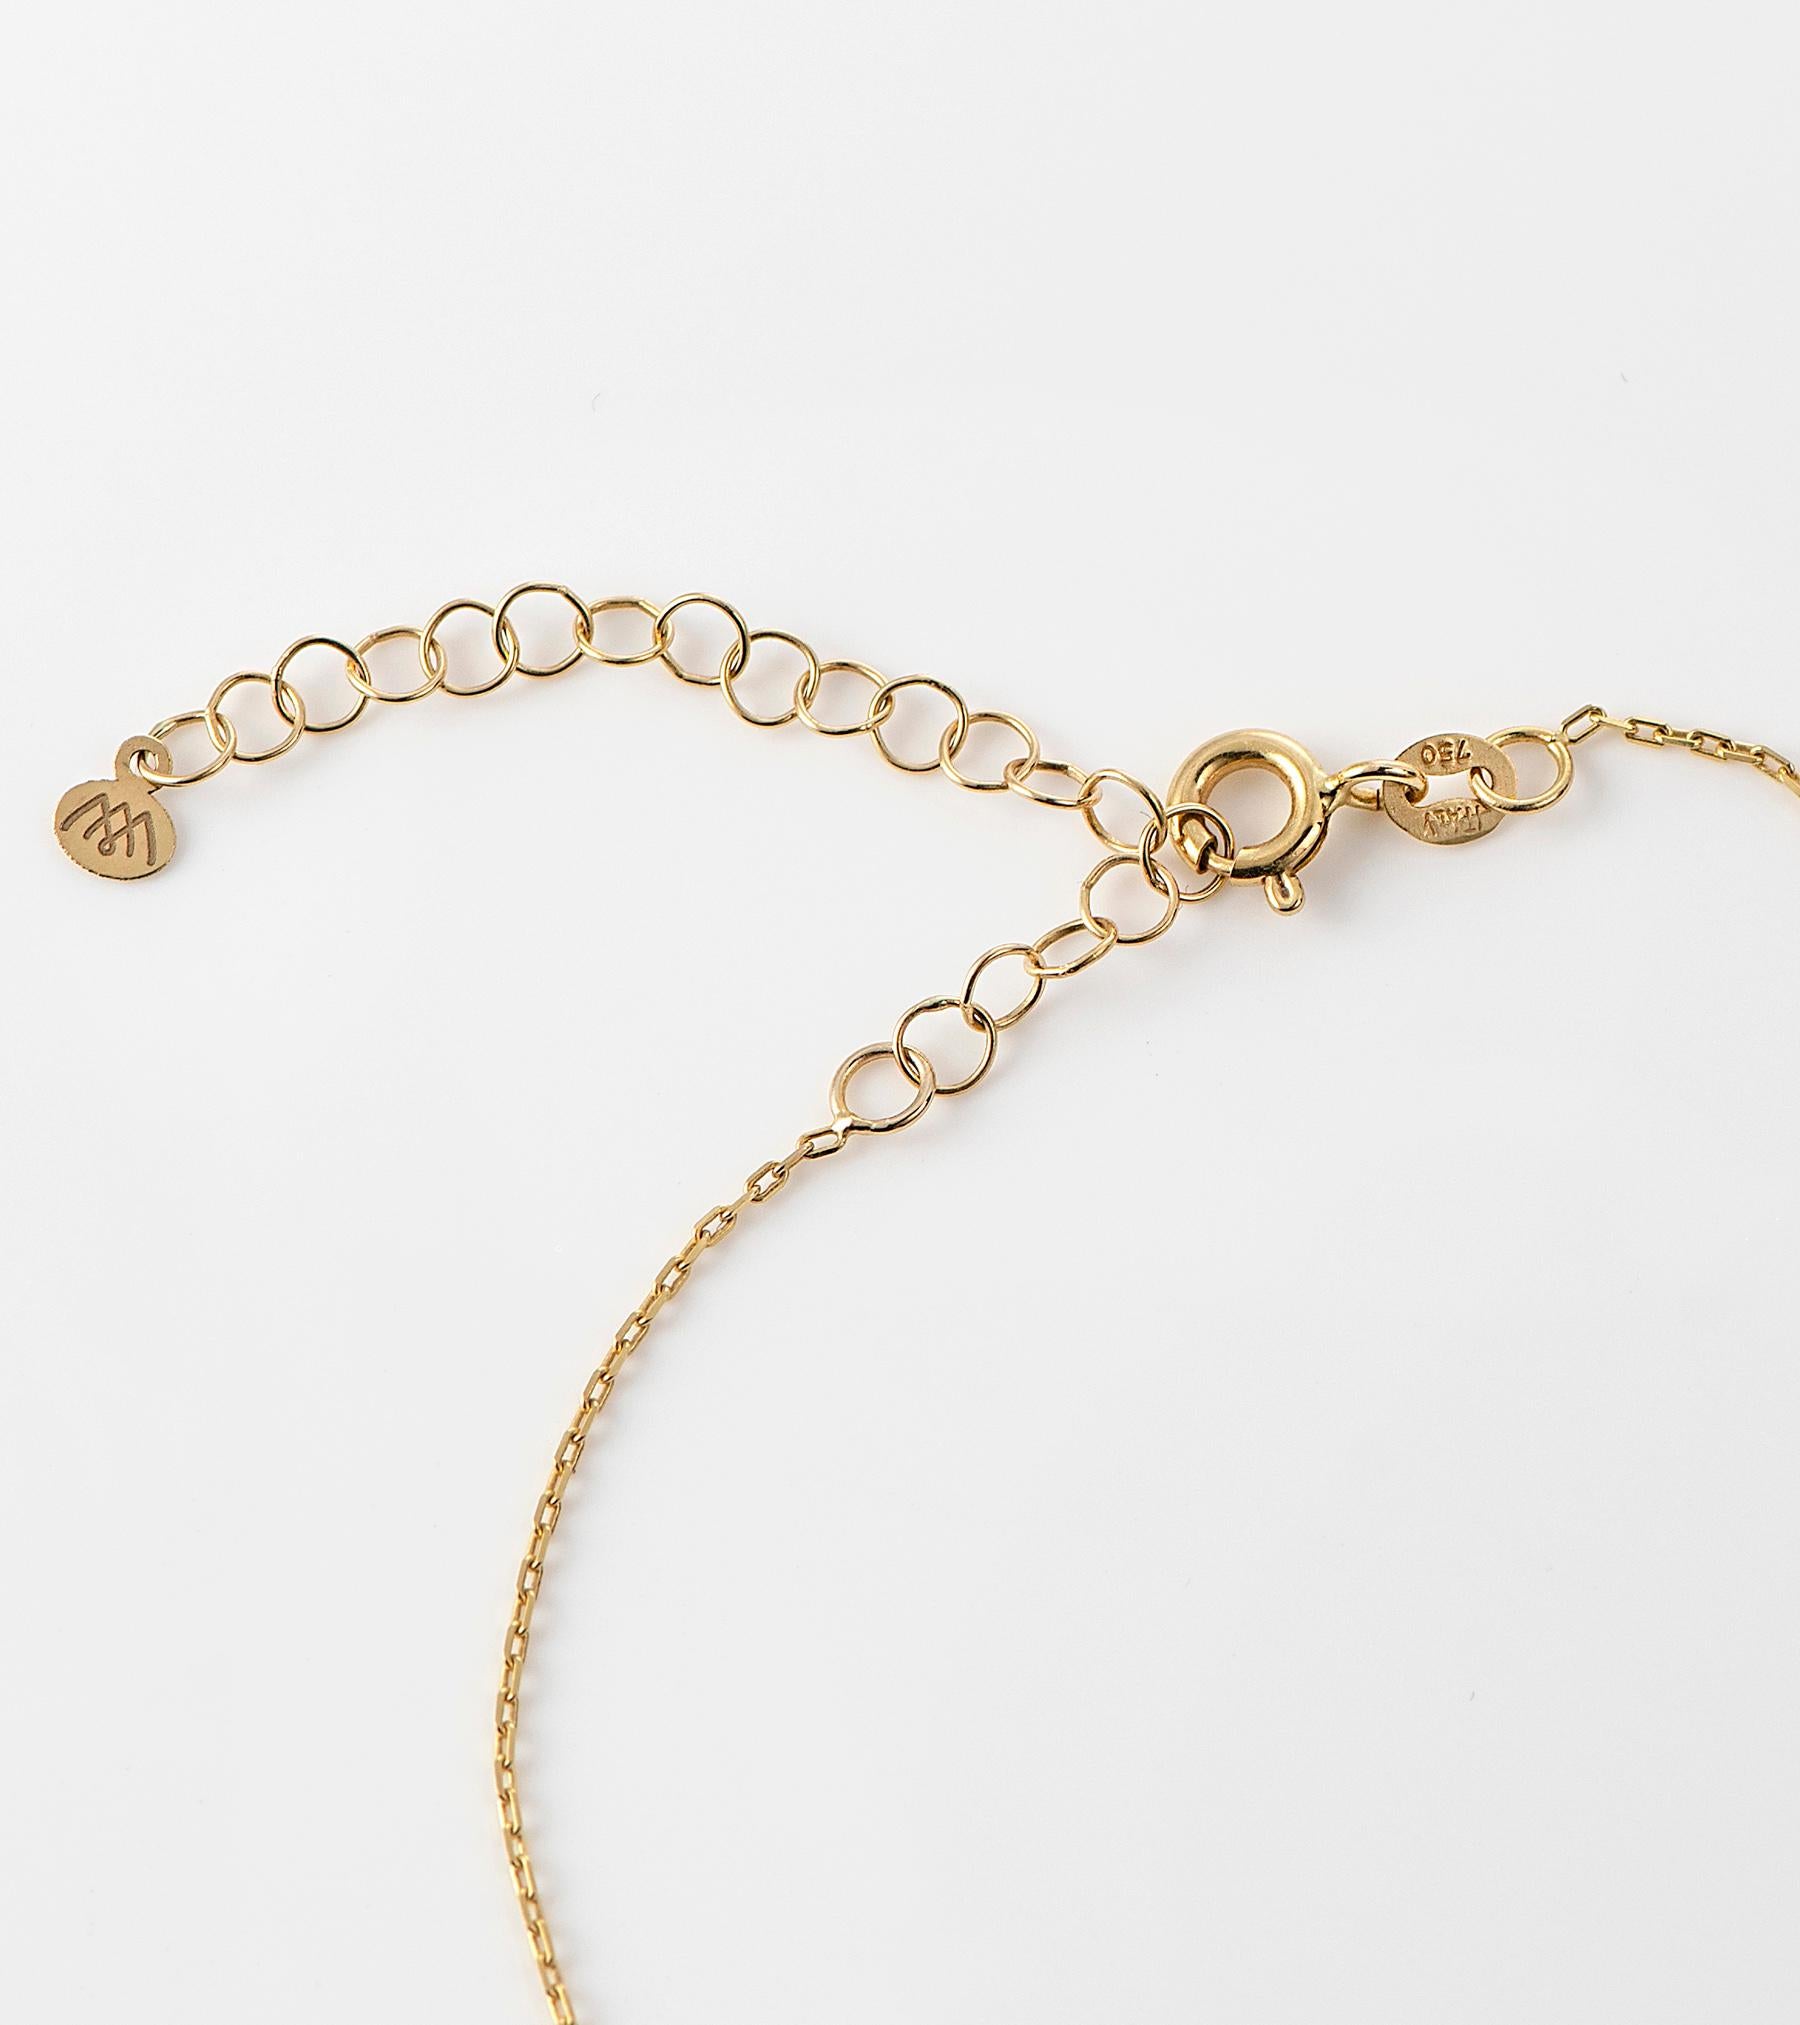 Our ‘Petal Pearl Necklace’, features a freshwater petal shaped pearl and is casted from 18Karat Yellow Gold and set with natural diamonds. 
Each petal pearl is handpicked for its luster and one-of-a-kind beautiful appearance and some variances may